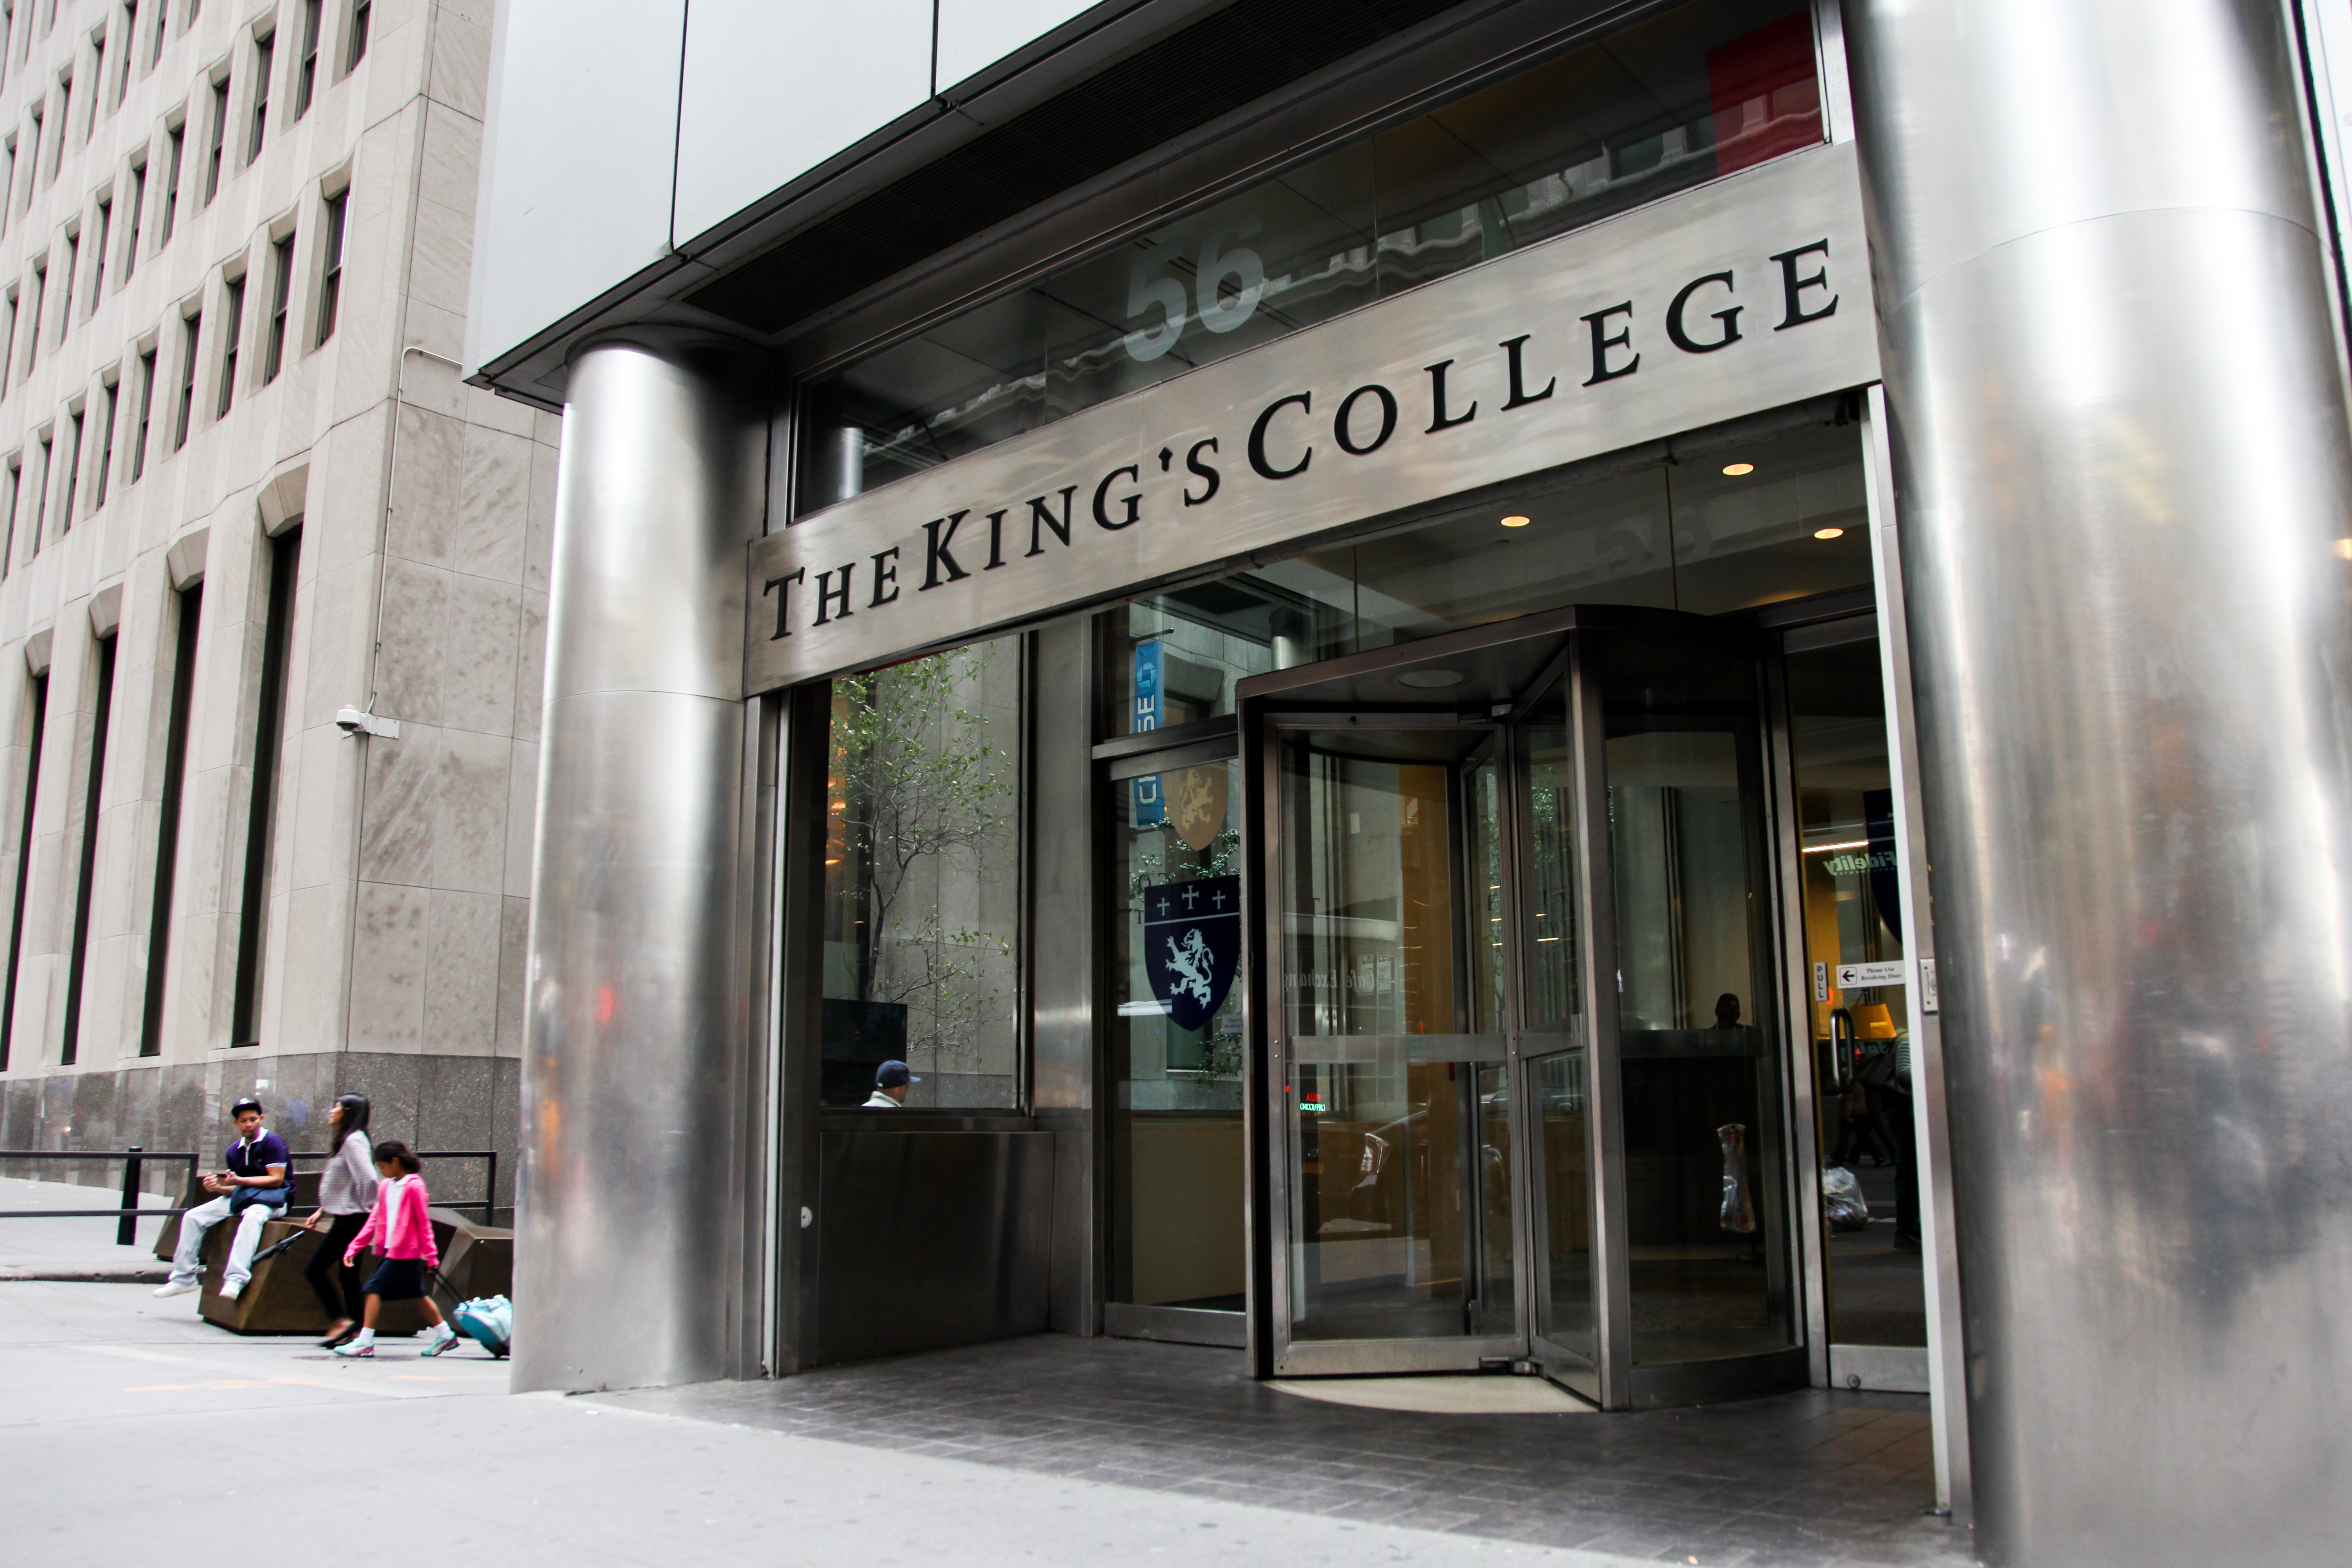 The King's College at 56 Broadway